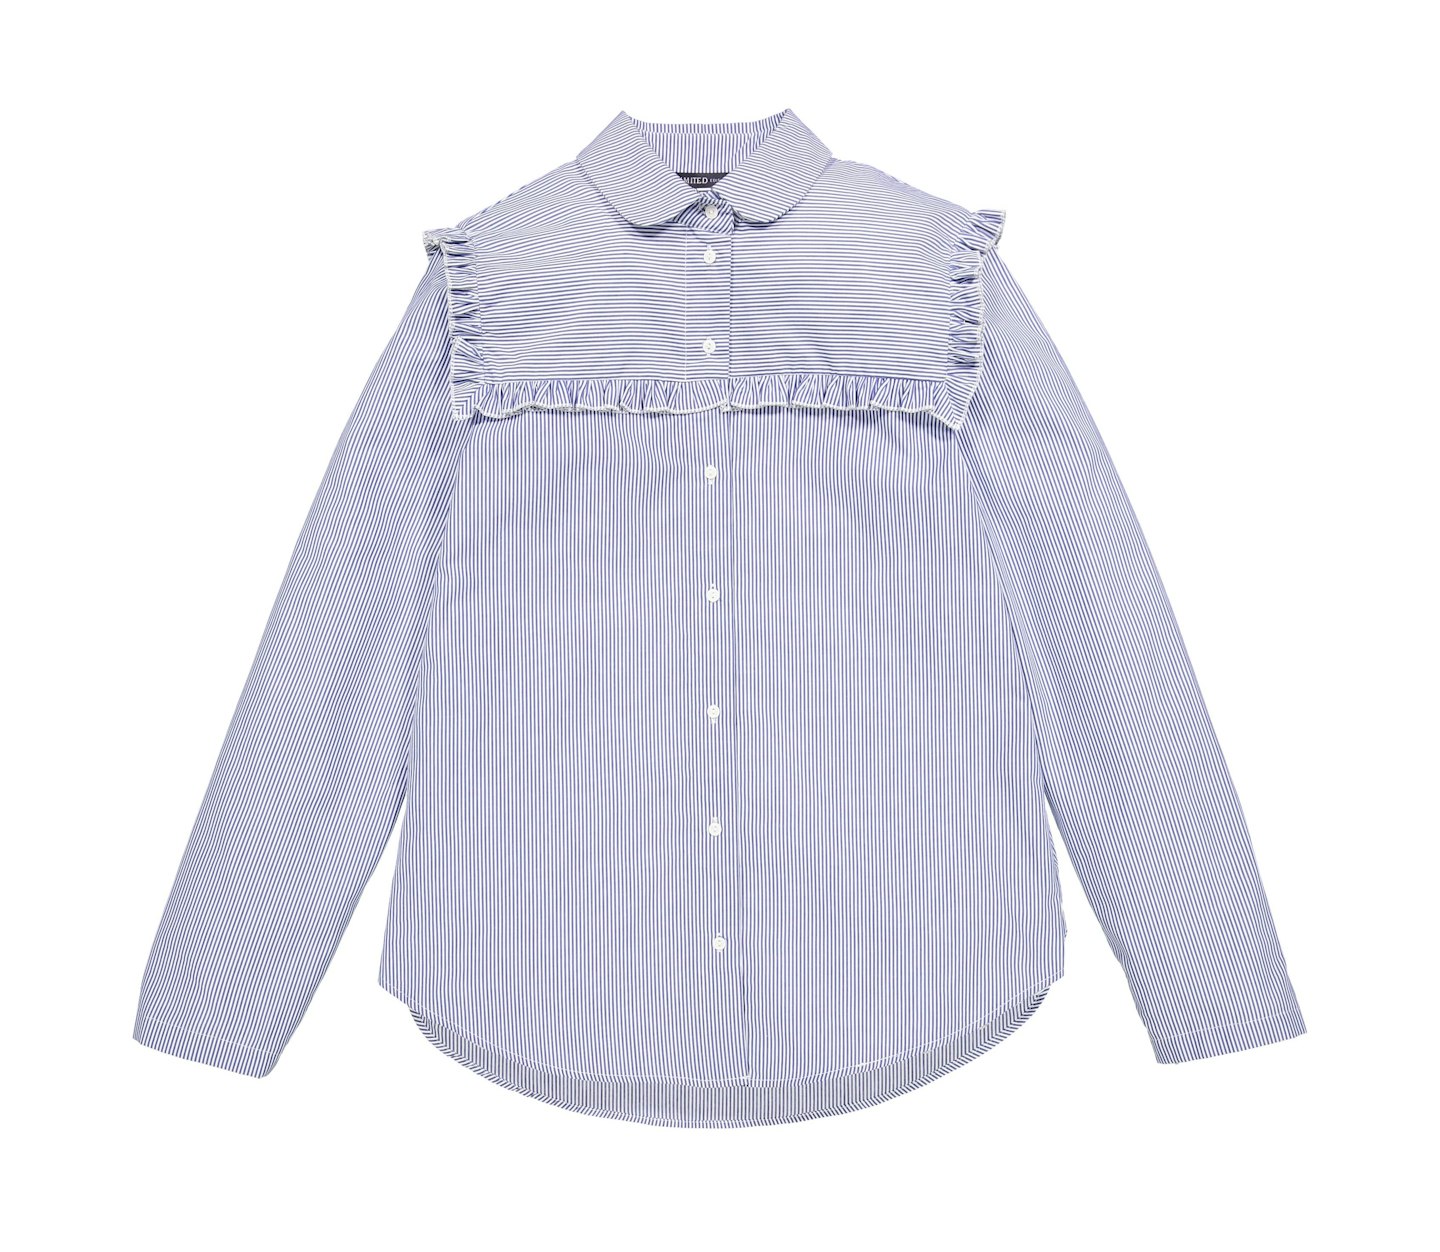 M&S blue shirt with frills